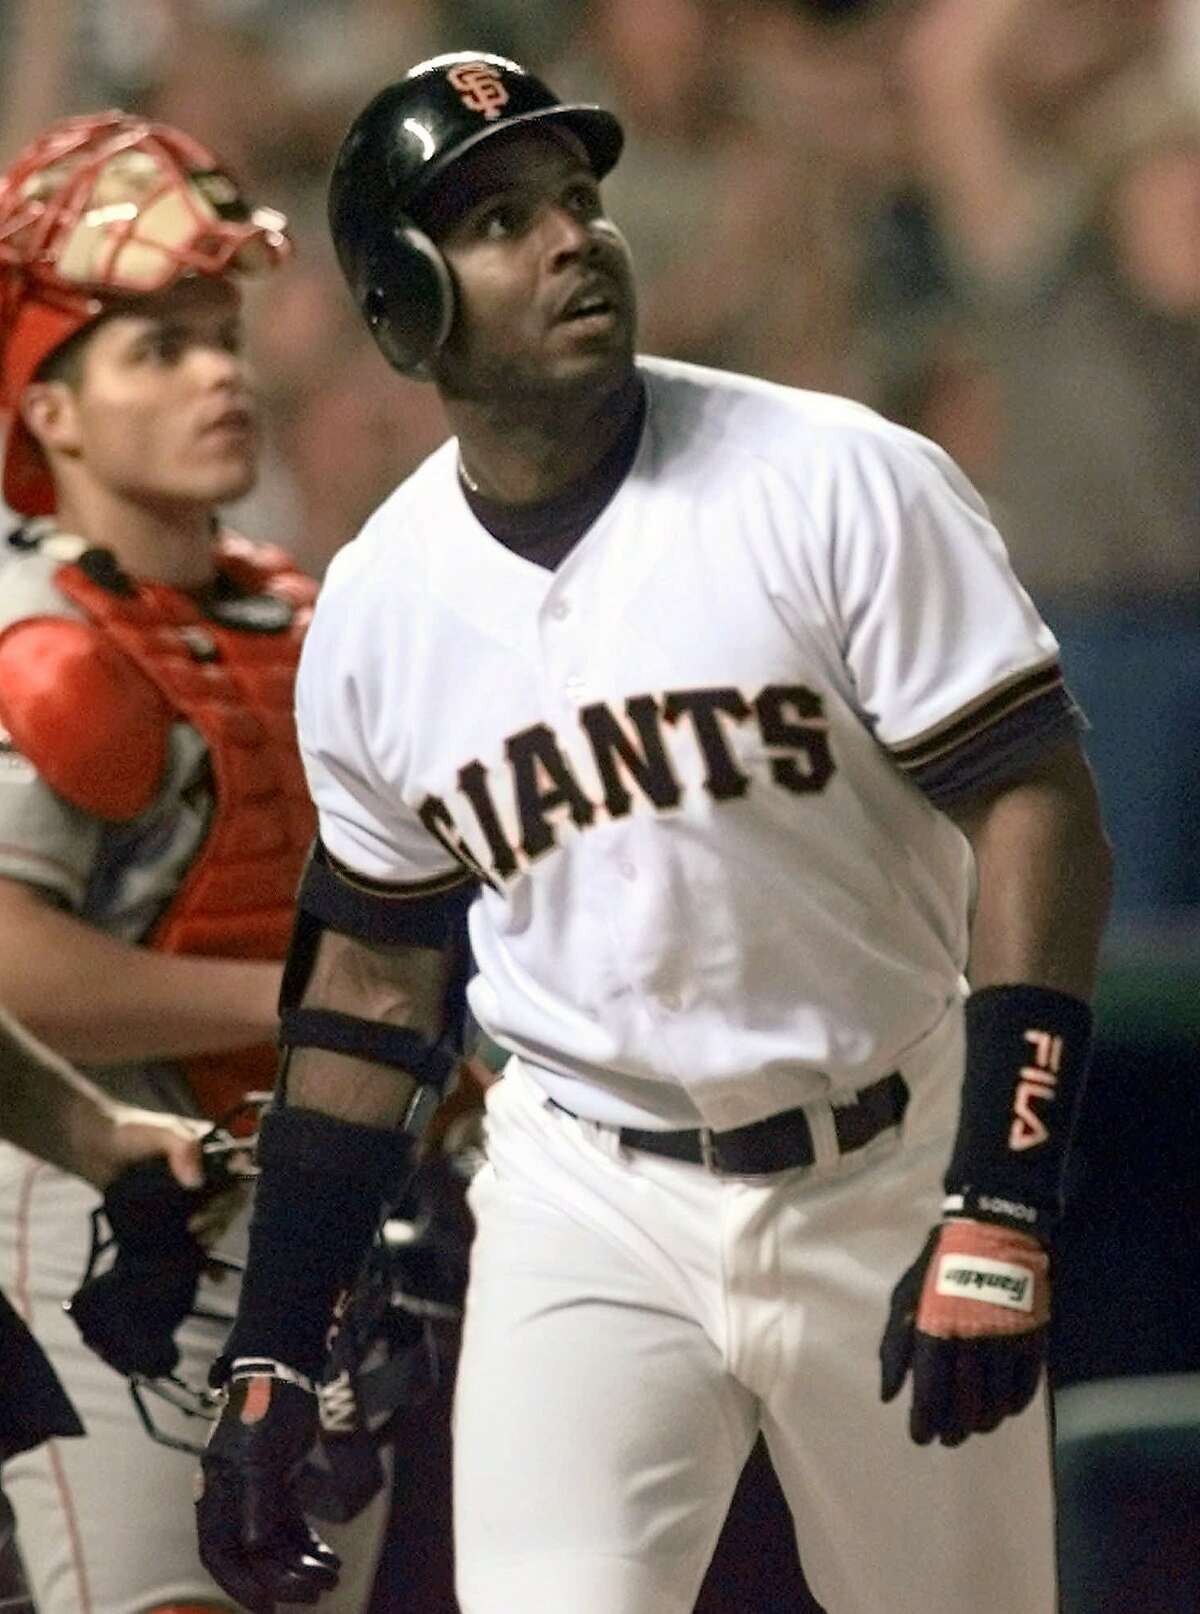 Giants drafted Barry Bonds but didn't sign him